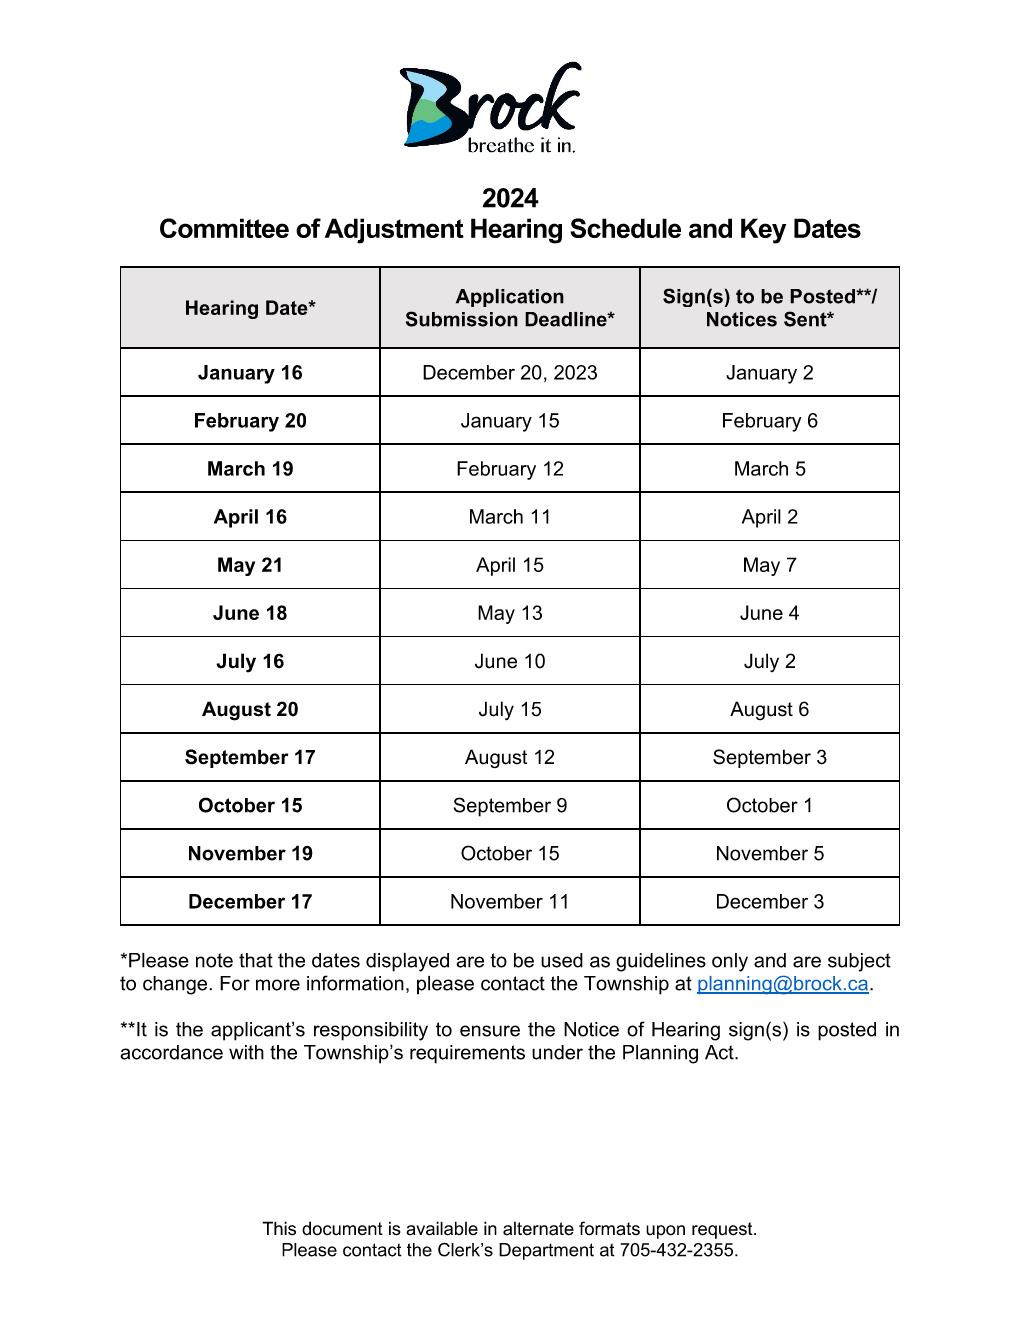 2023 Committee of Adjustment Minor variance Hearings Schedule with Application, Signage, and Appeal Deadlines